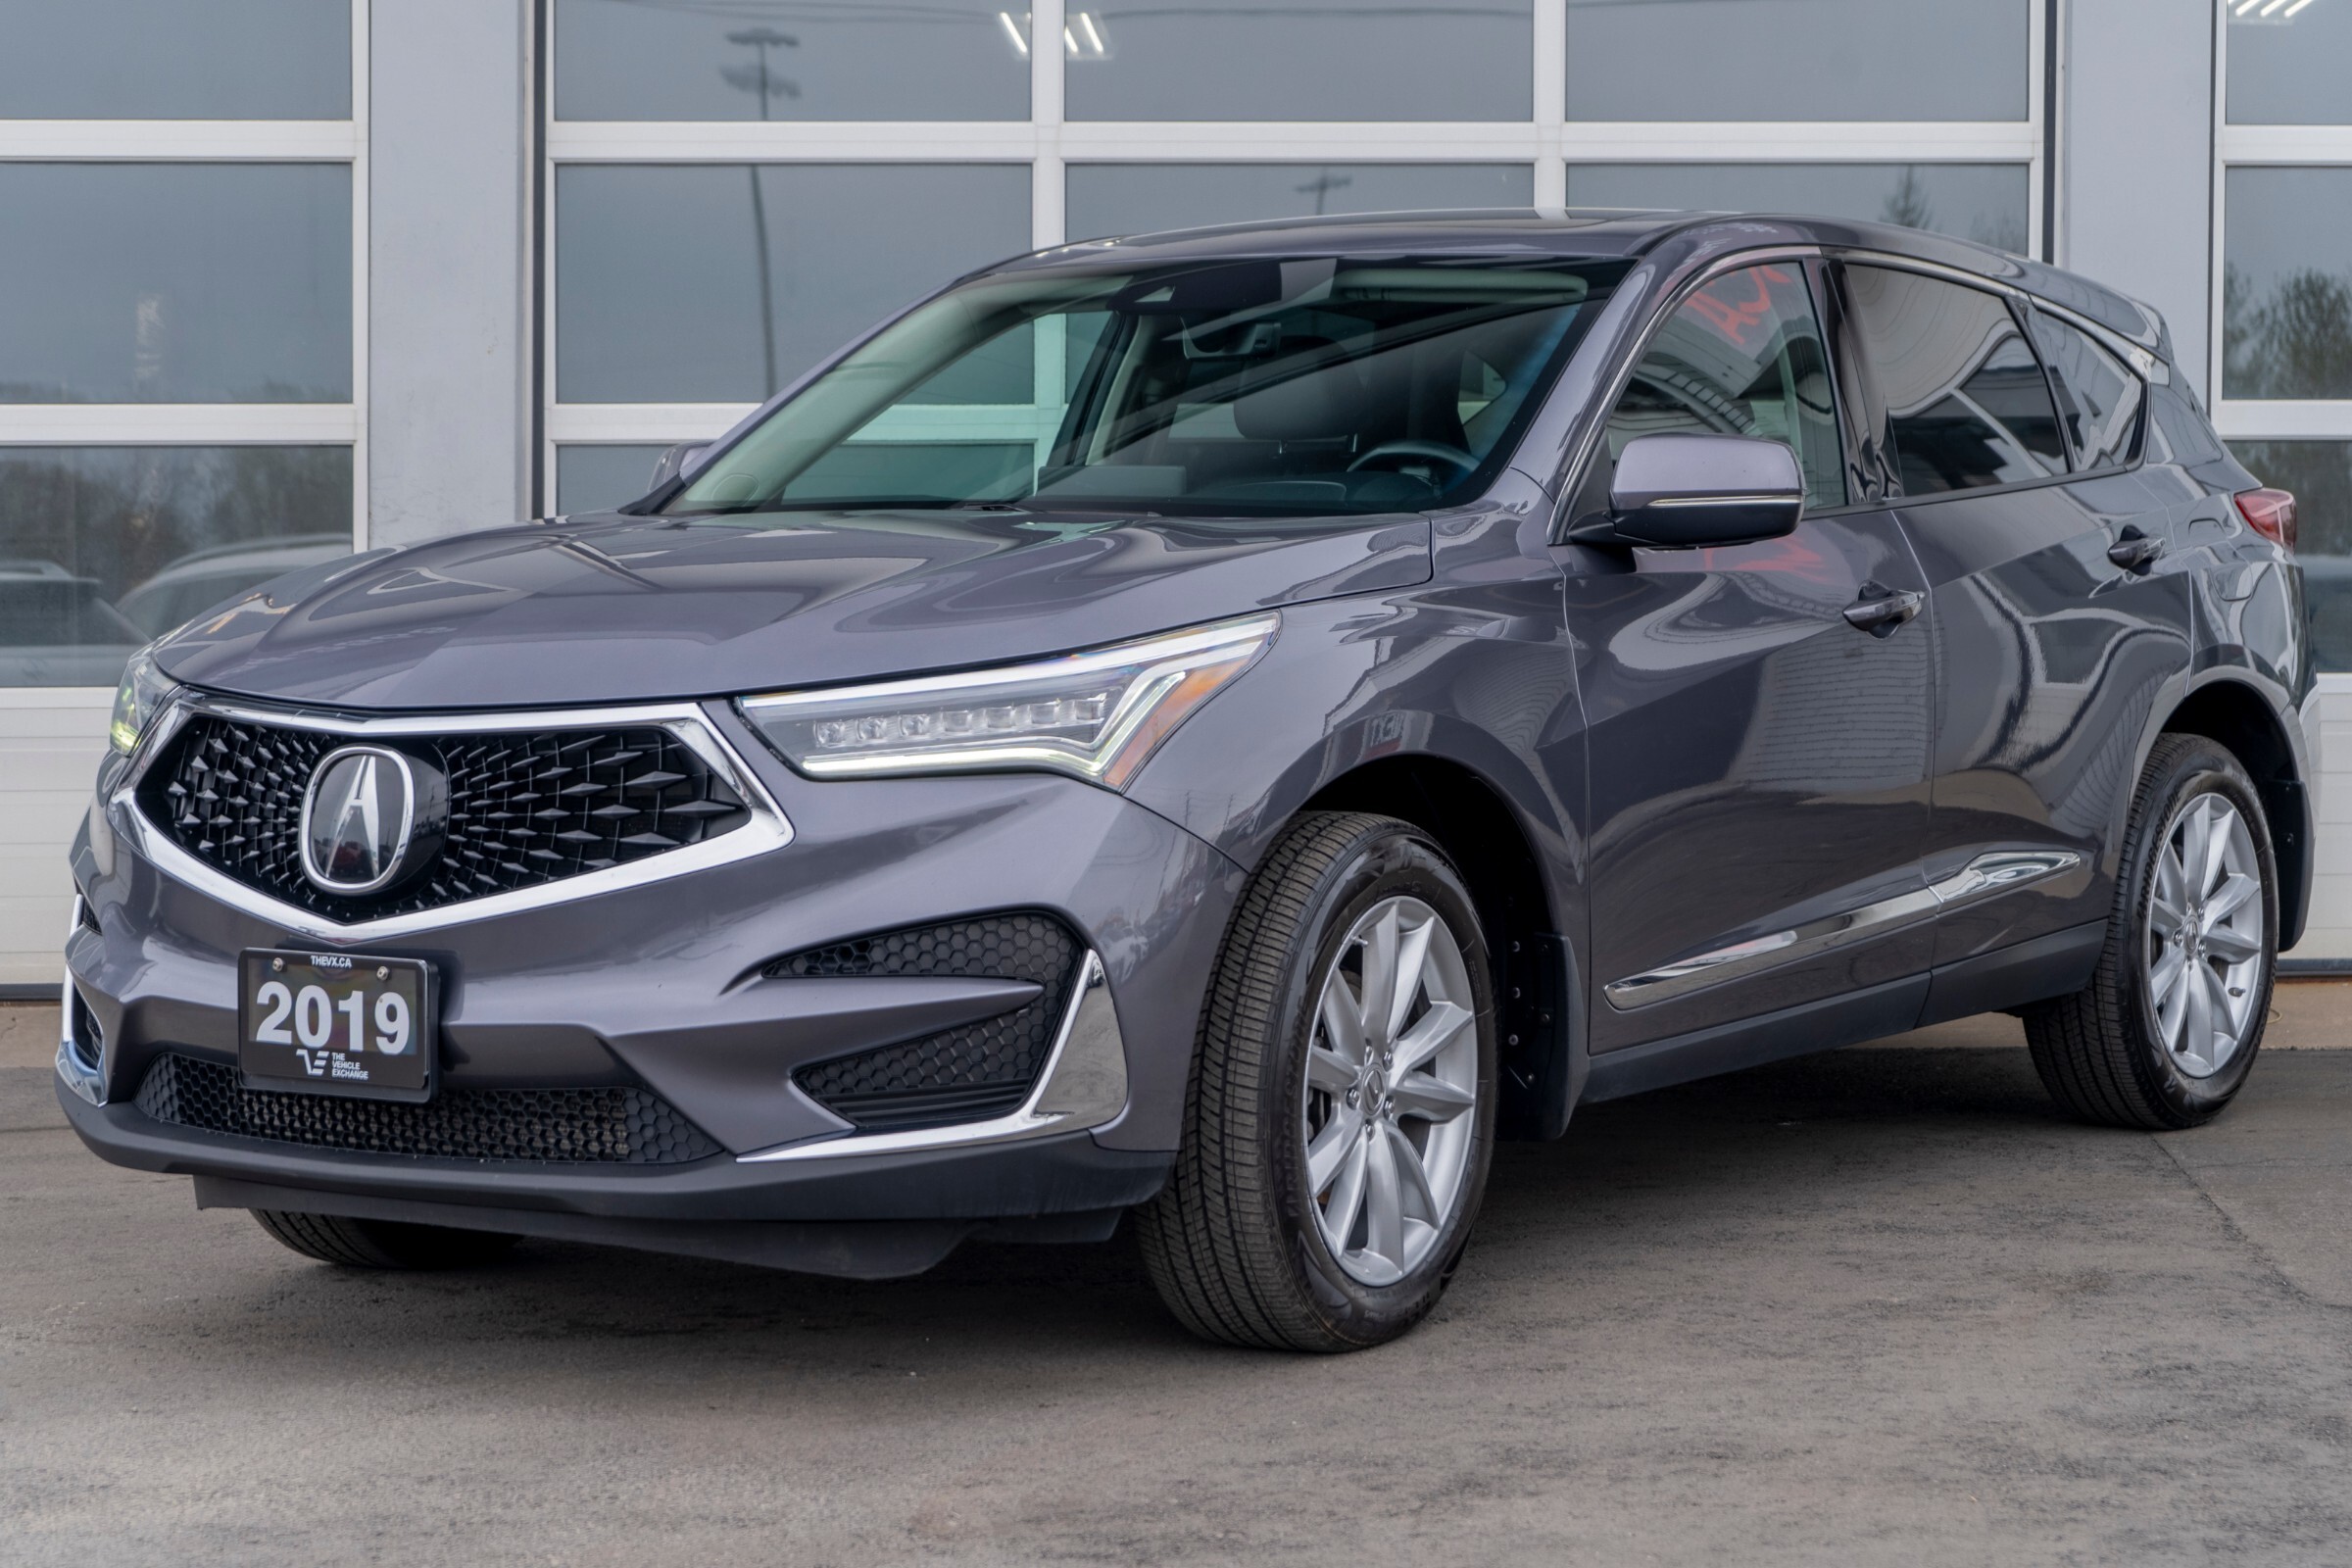 2019 Acura RDX AWD| Leather Interior| Rearview Camera| Bluetooth 